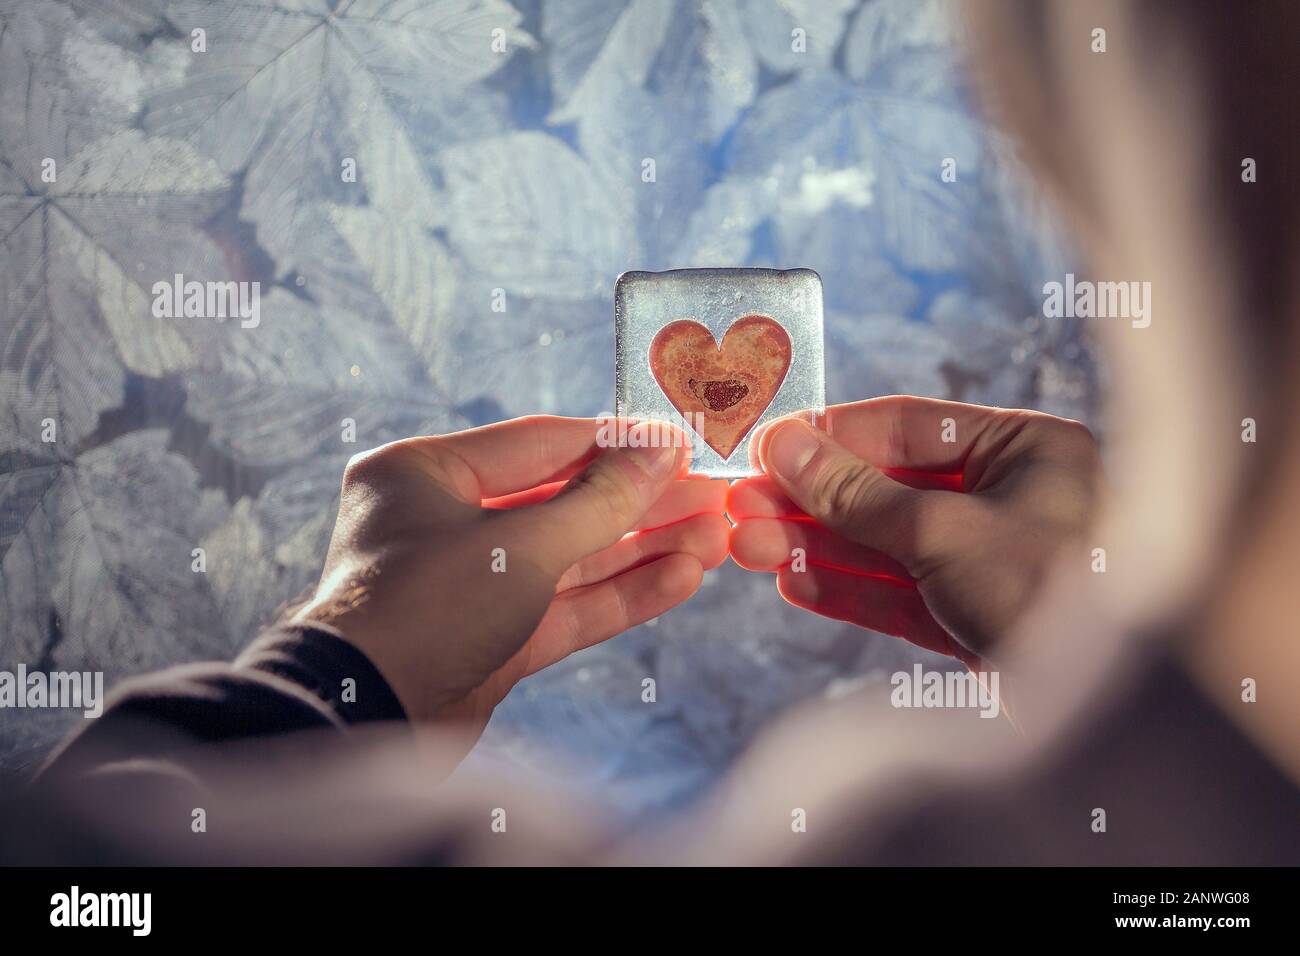 A young man holds a heart shaped object, conveying a range of emotions such as love, longing, loneliness and infatuation. Stock Photo